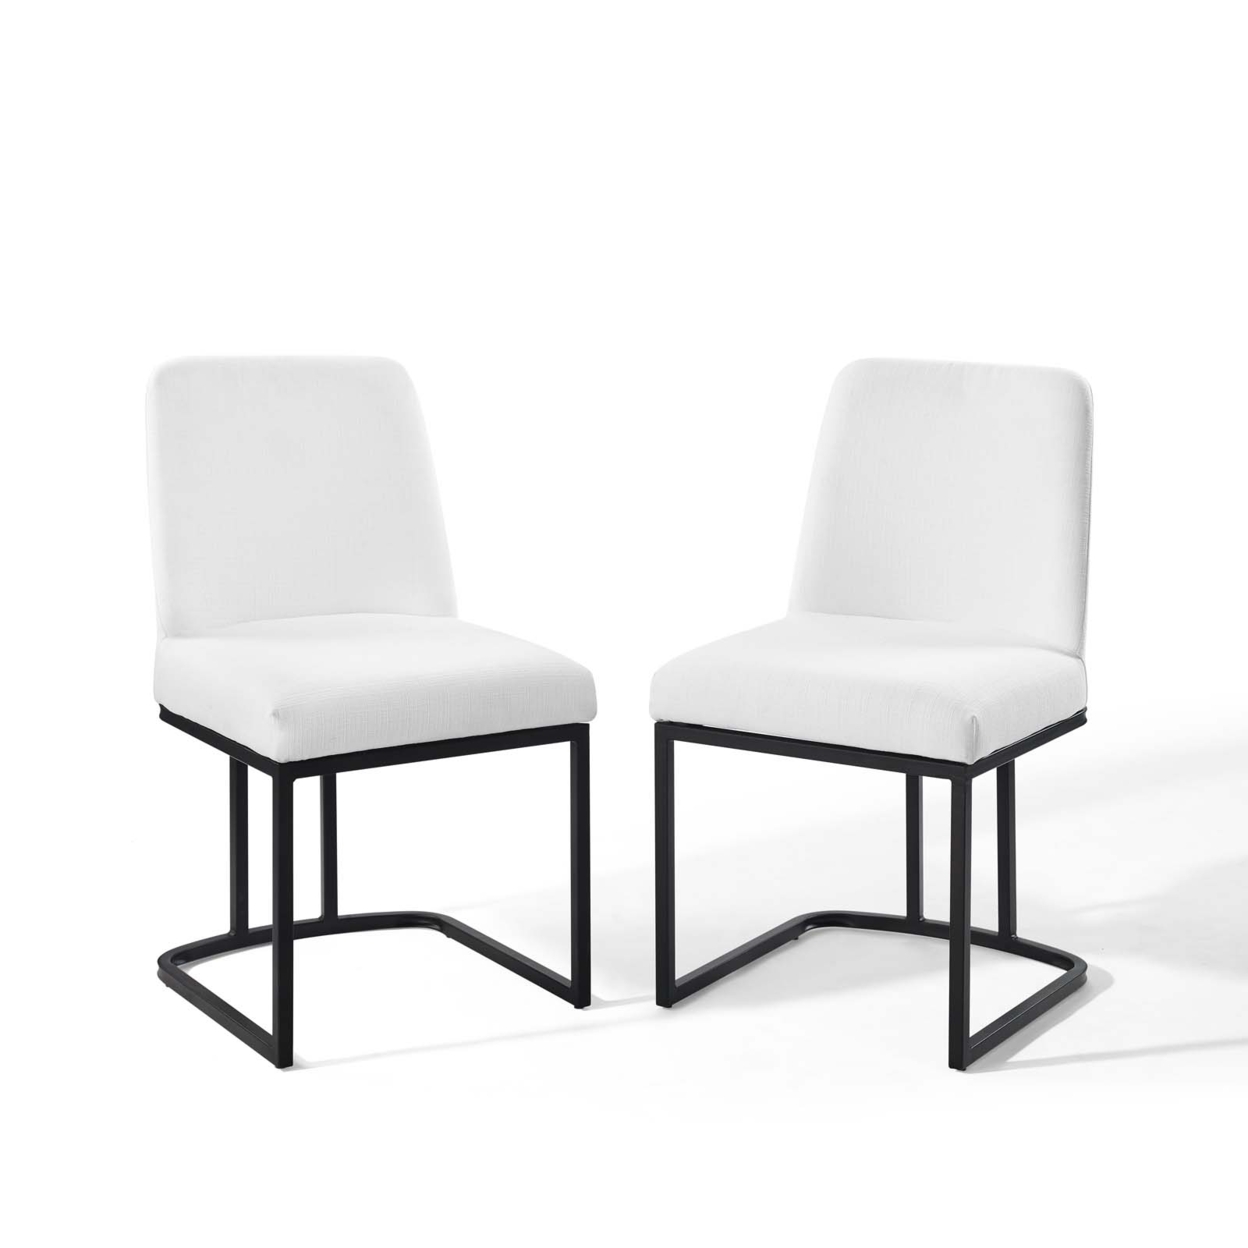 Amplify Sled Base Upholstered Fabric Dining Chairs - Set Of 2, Black White